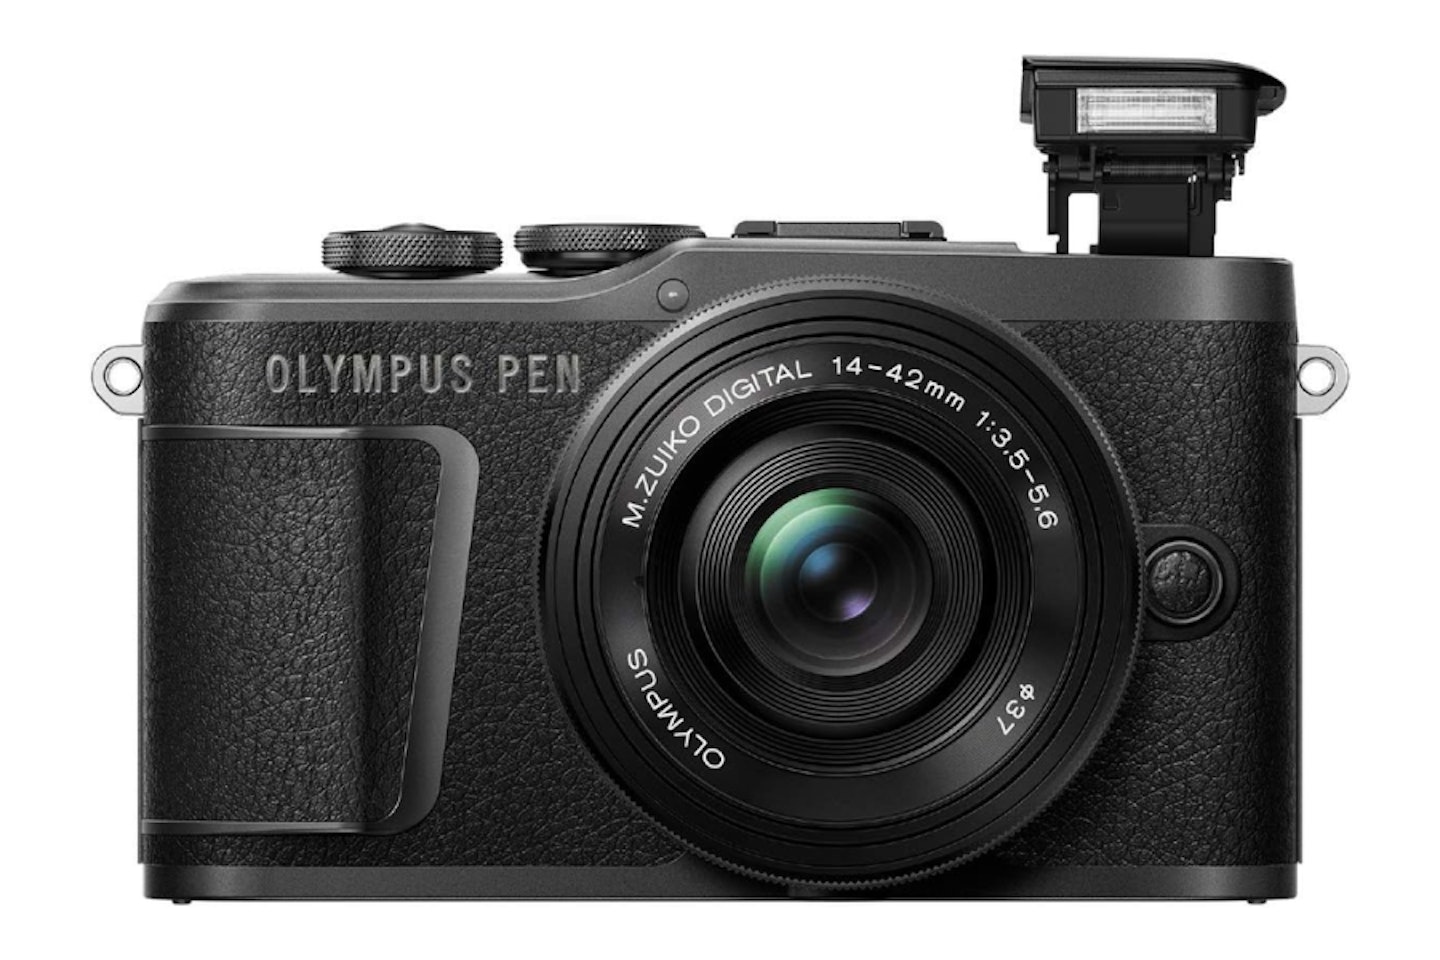  Olympus PEN E-PL10  - one of the best entry-level cameras